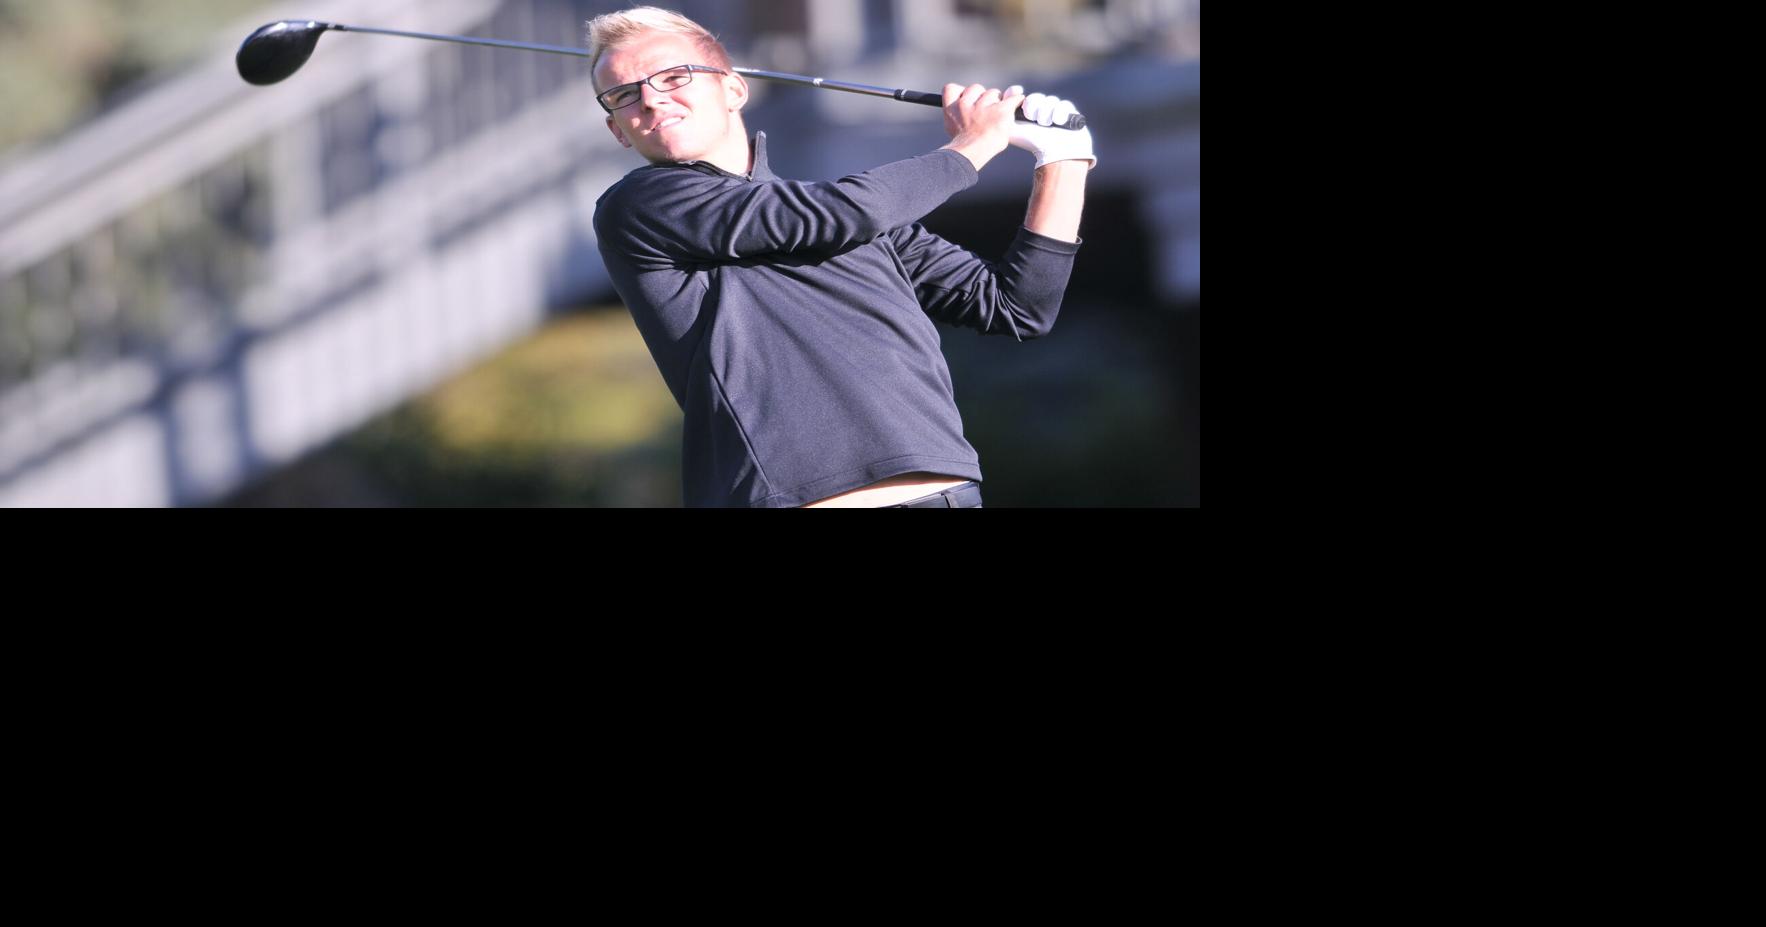 Paul brothers continue to put CU Buffs golf on the map | Golf Insider ...